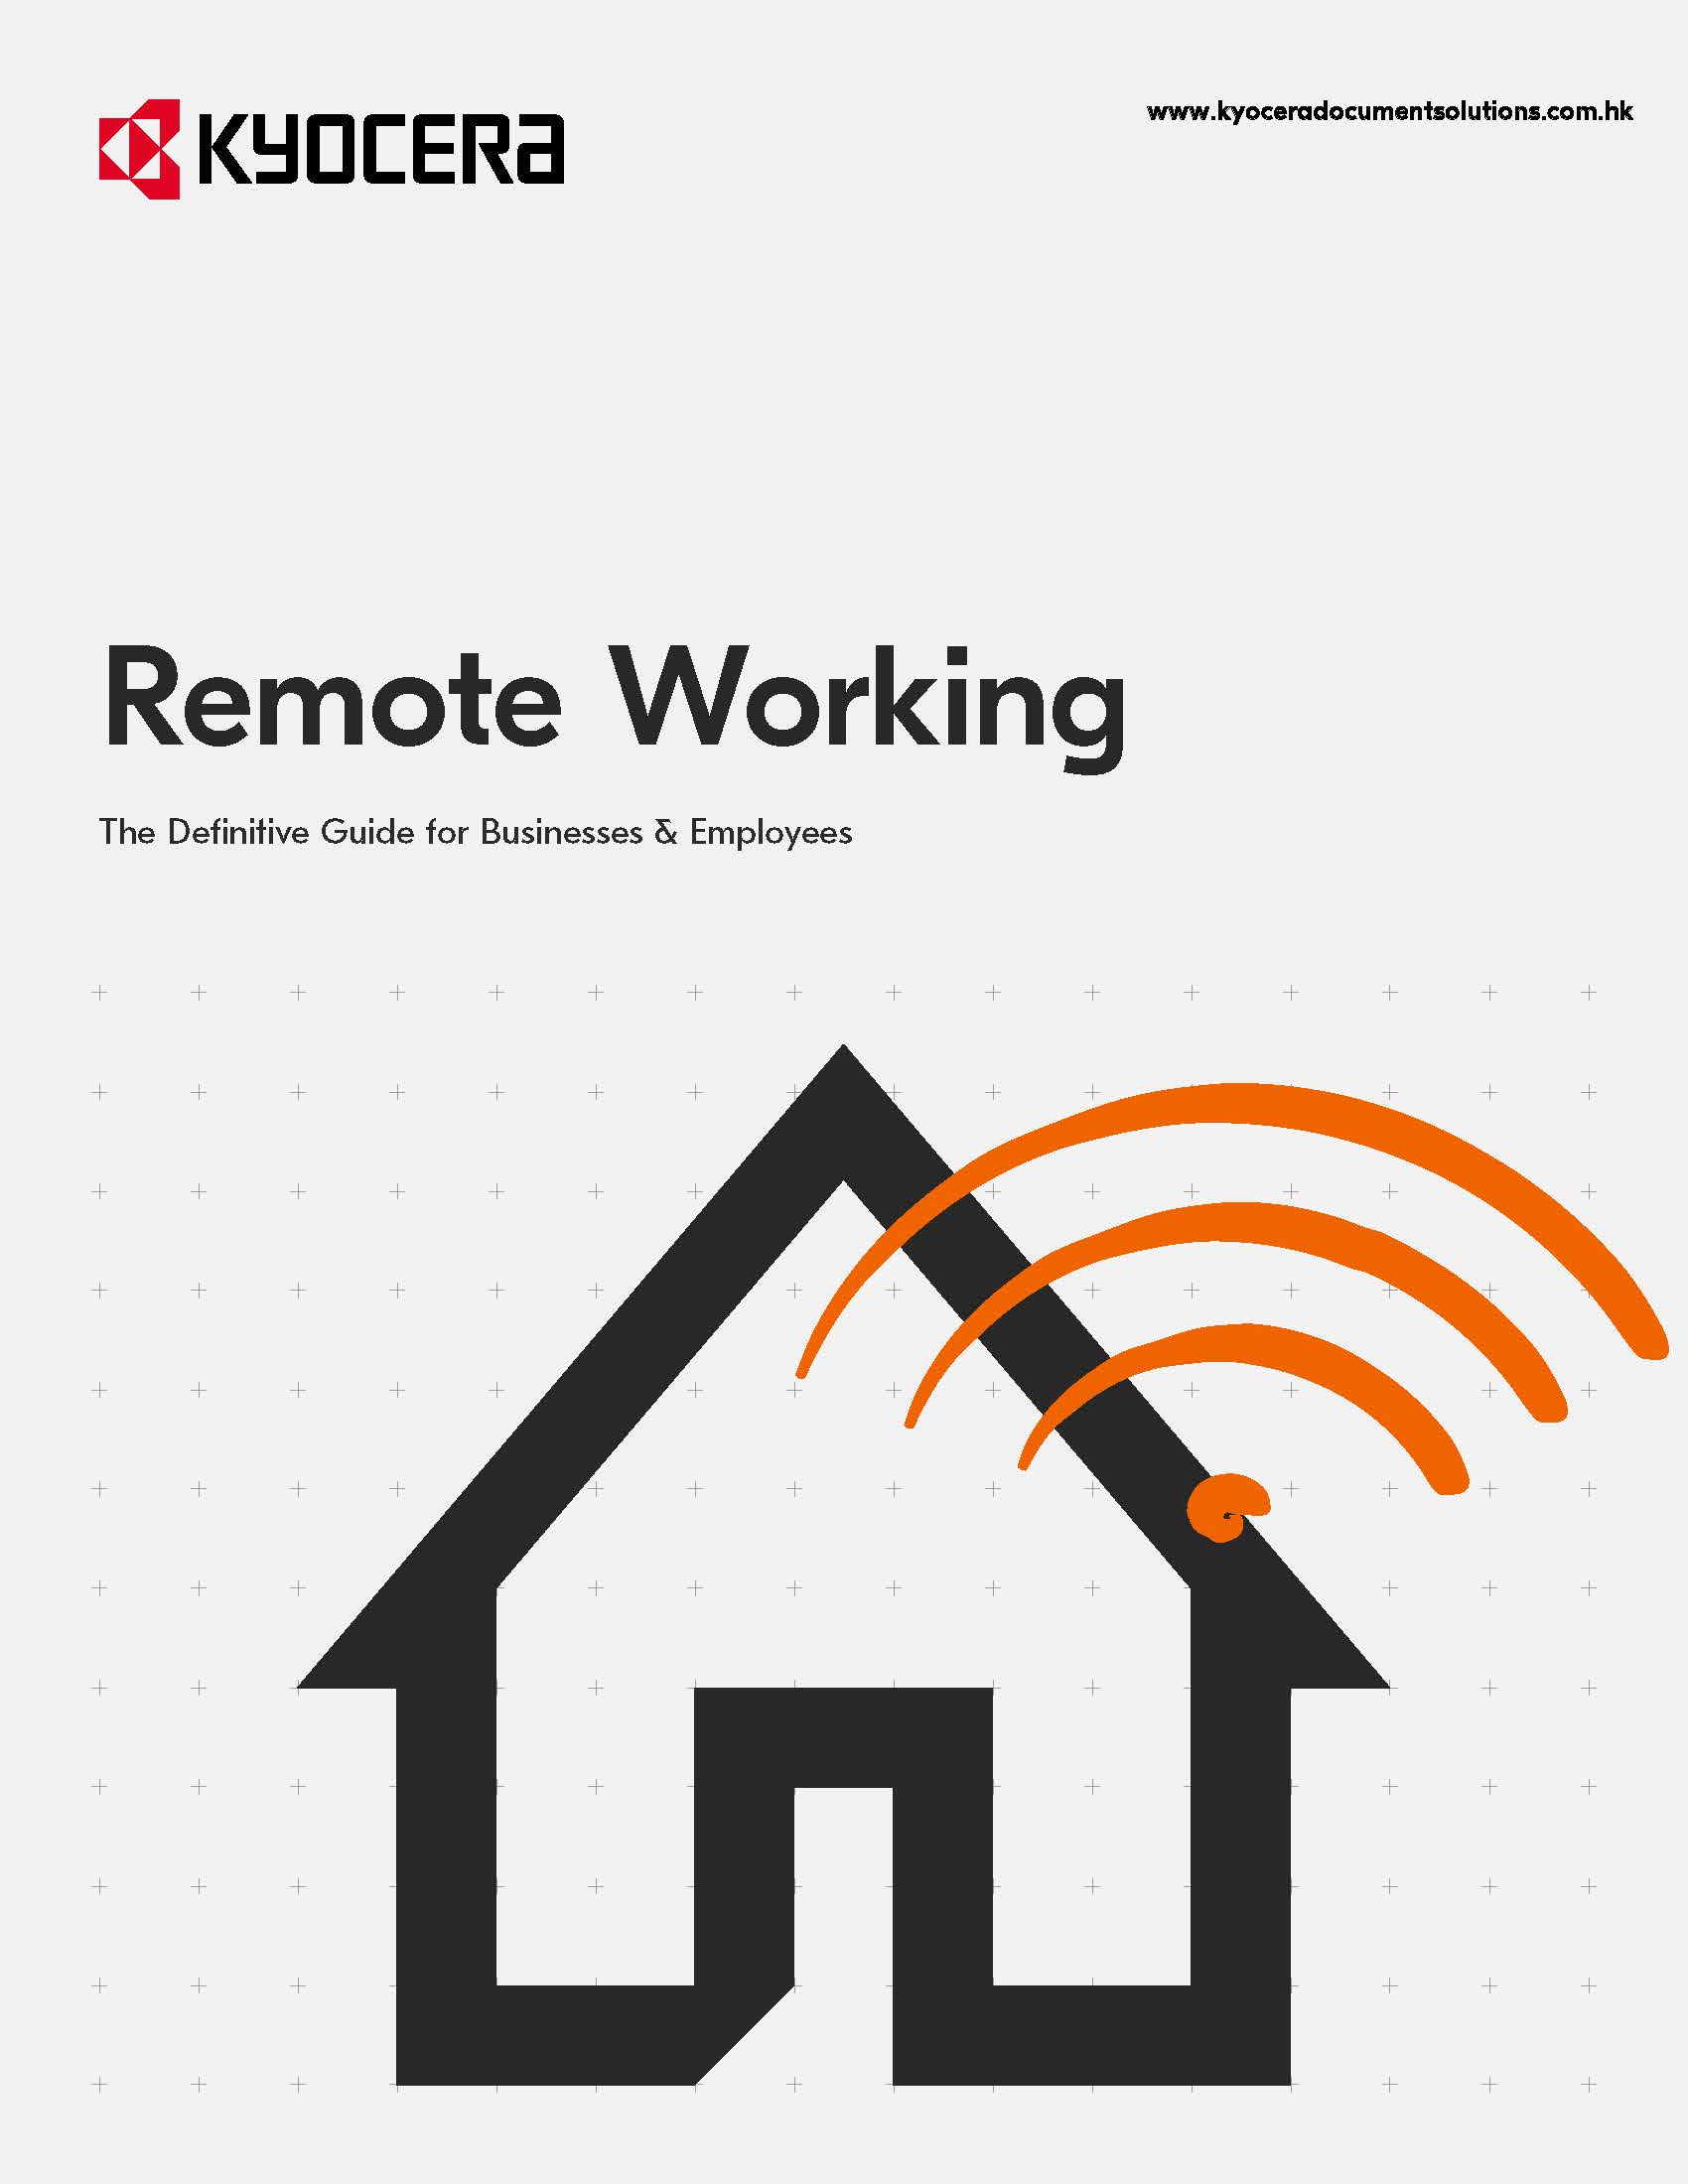 The Remote Working Guidebook